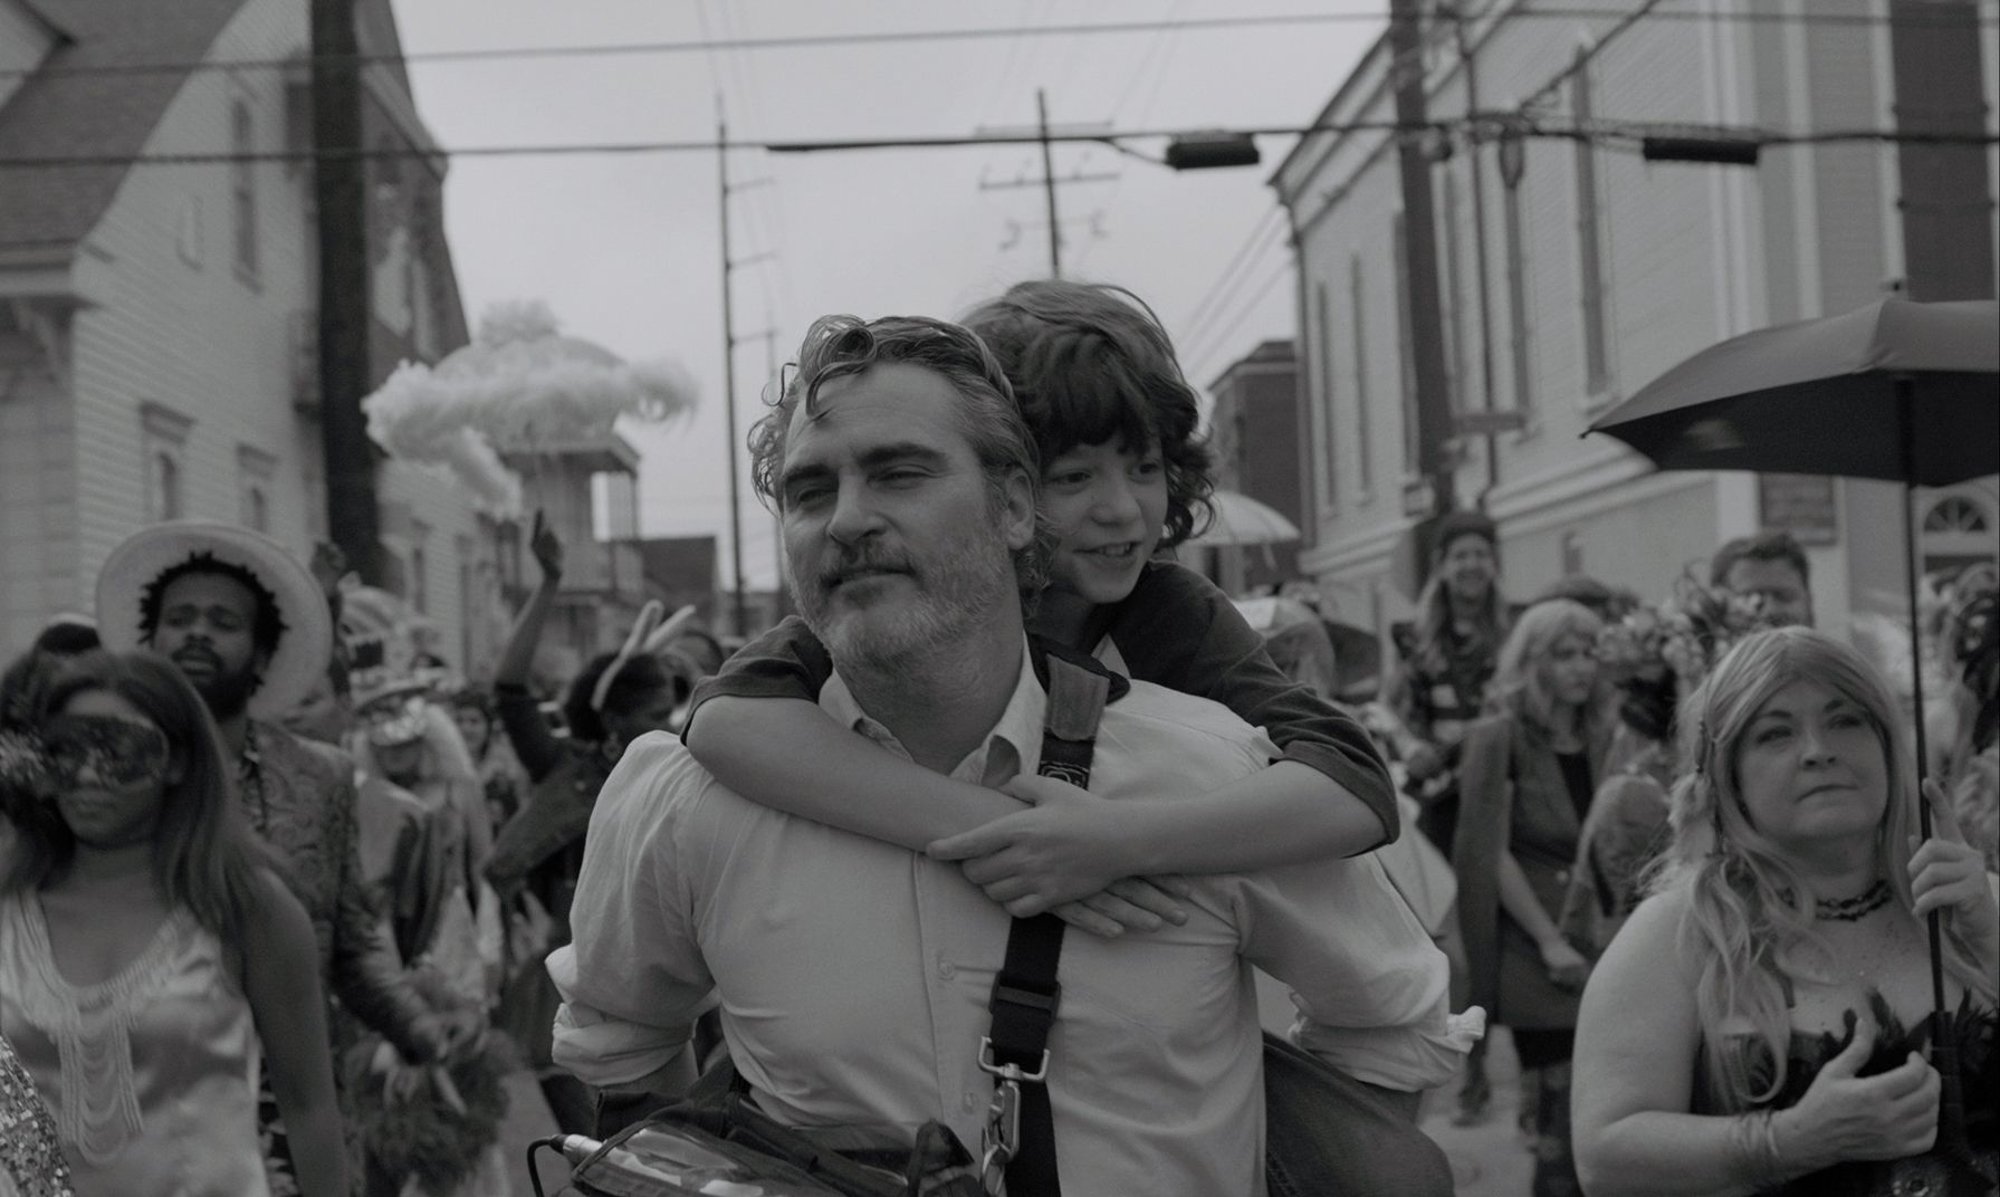 'C'mon C'mon' actors Joaquin Phoenix as Johnny and Woody Norman as Jesse walking through a crowd with Jesse on Johnny's back